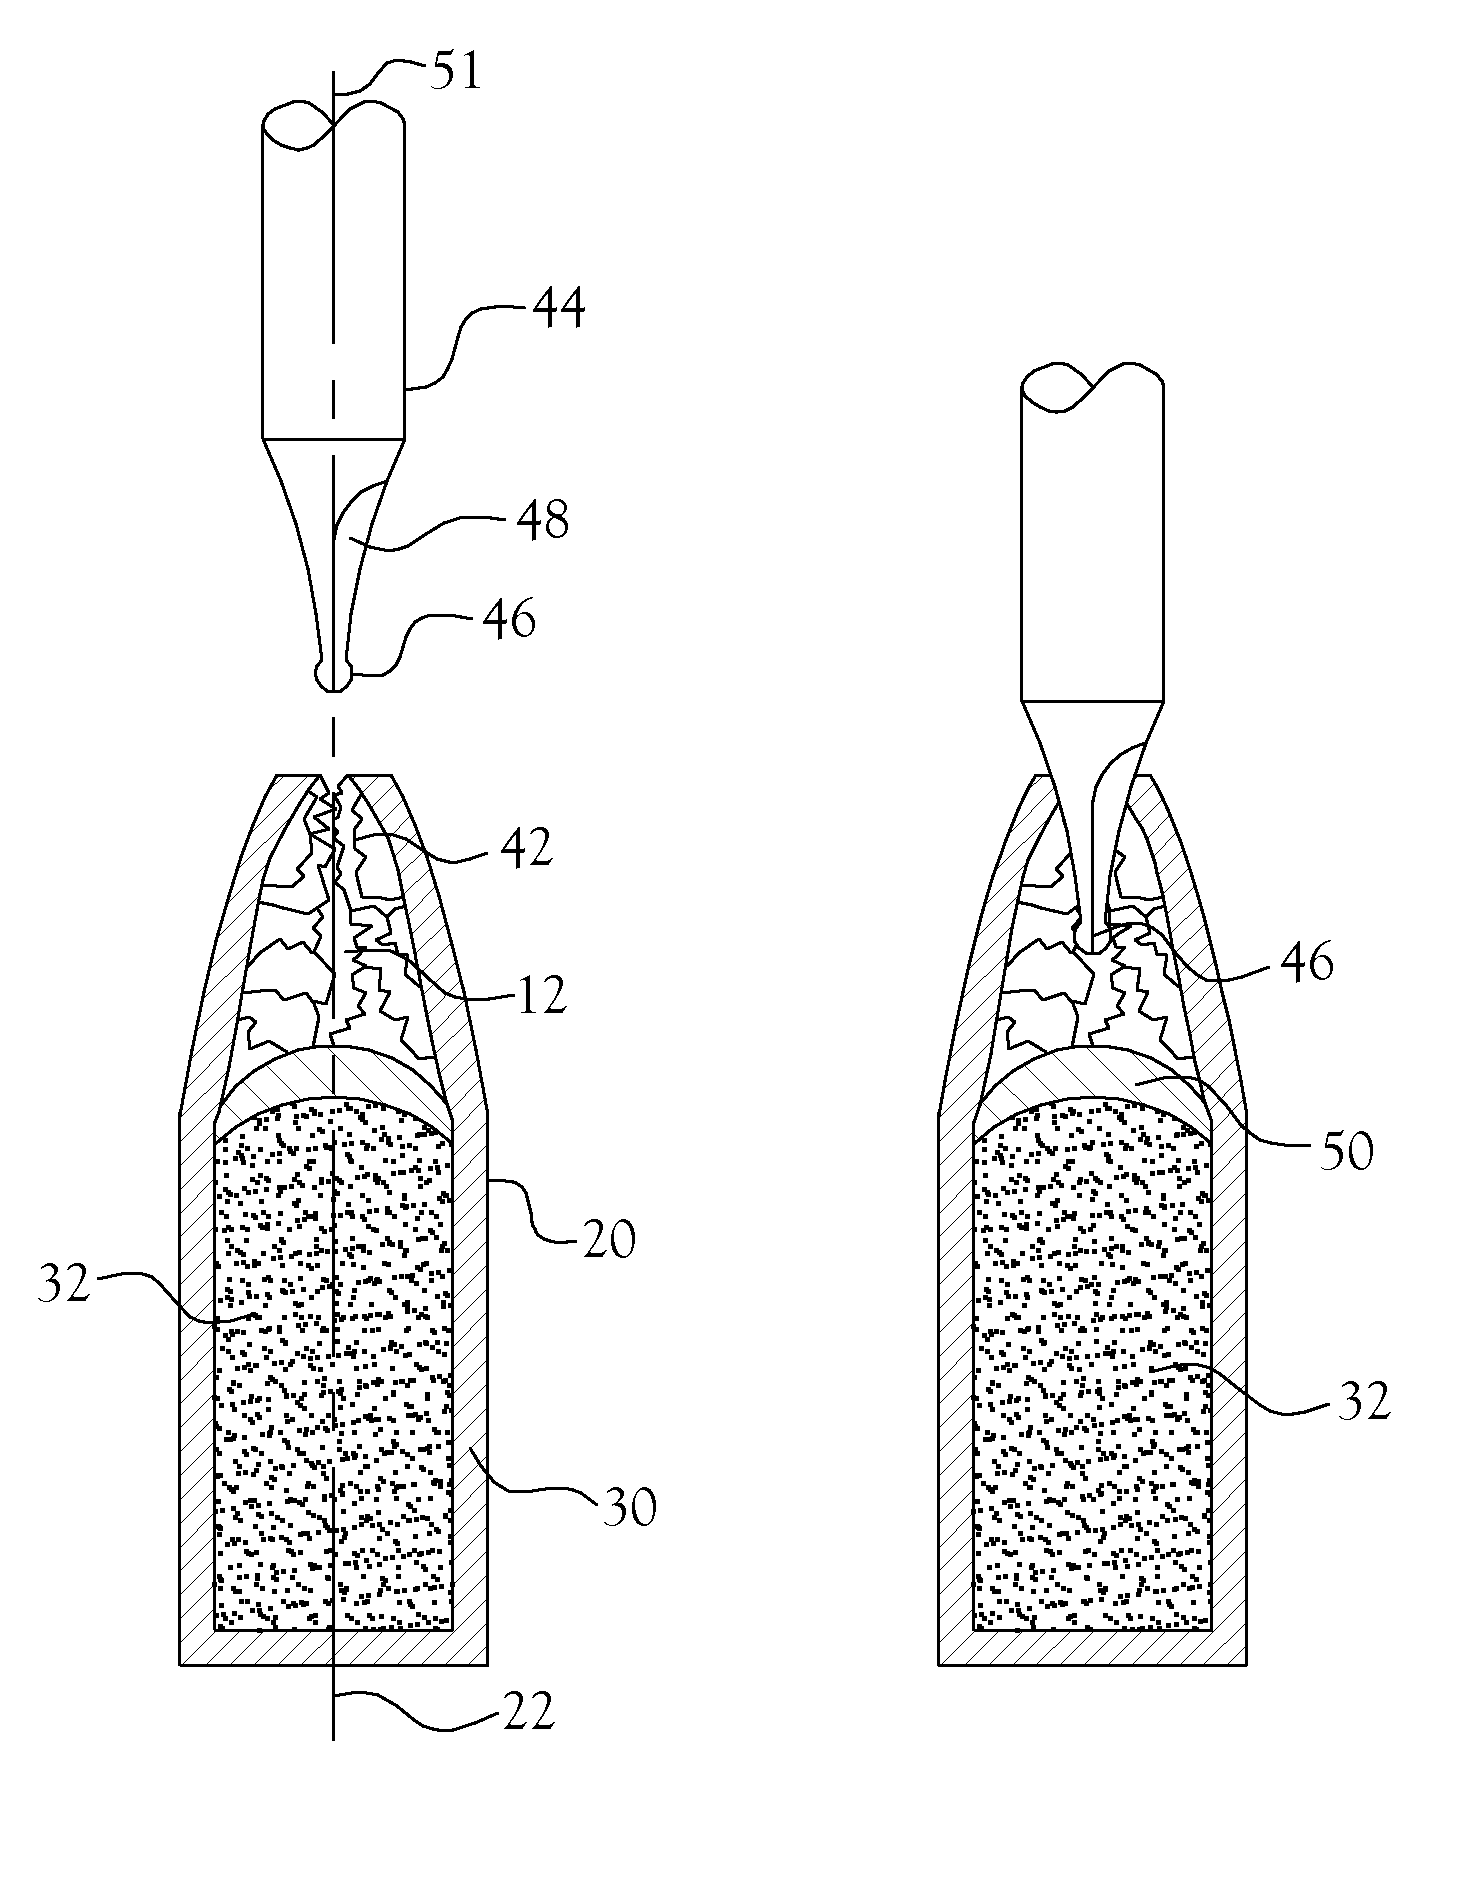 Method of enhancing the external ballistics and ensuring consistent terminal ballistics of an ammunition projectile and product obtained